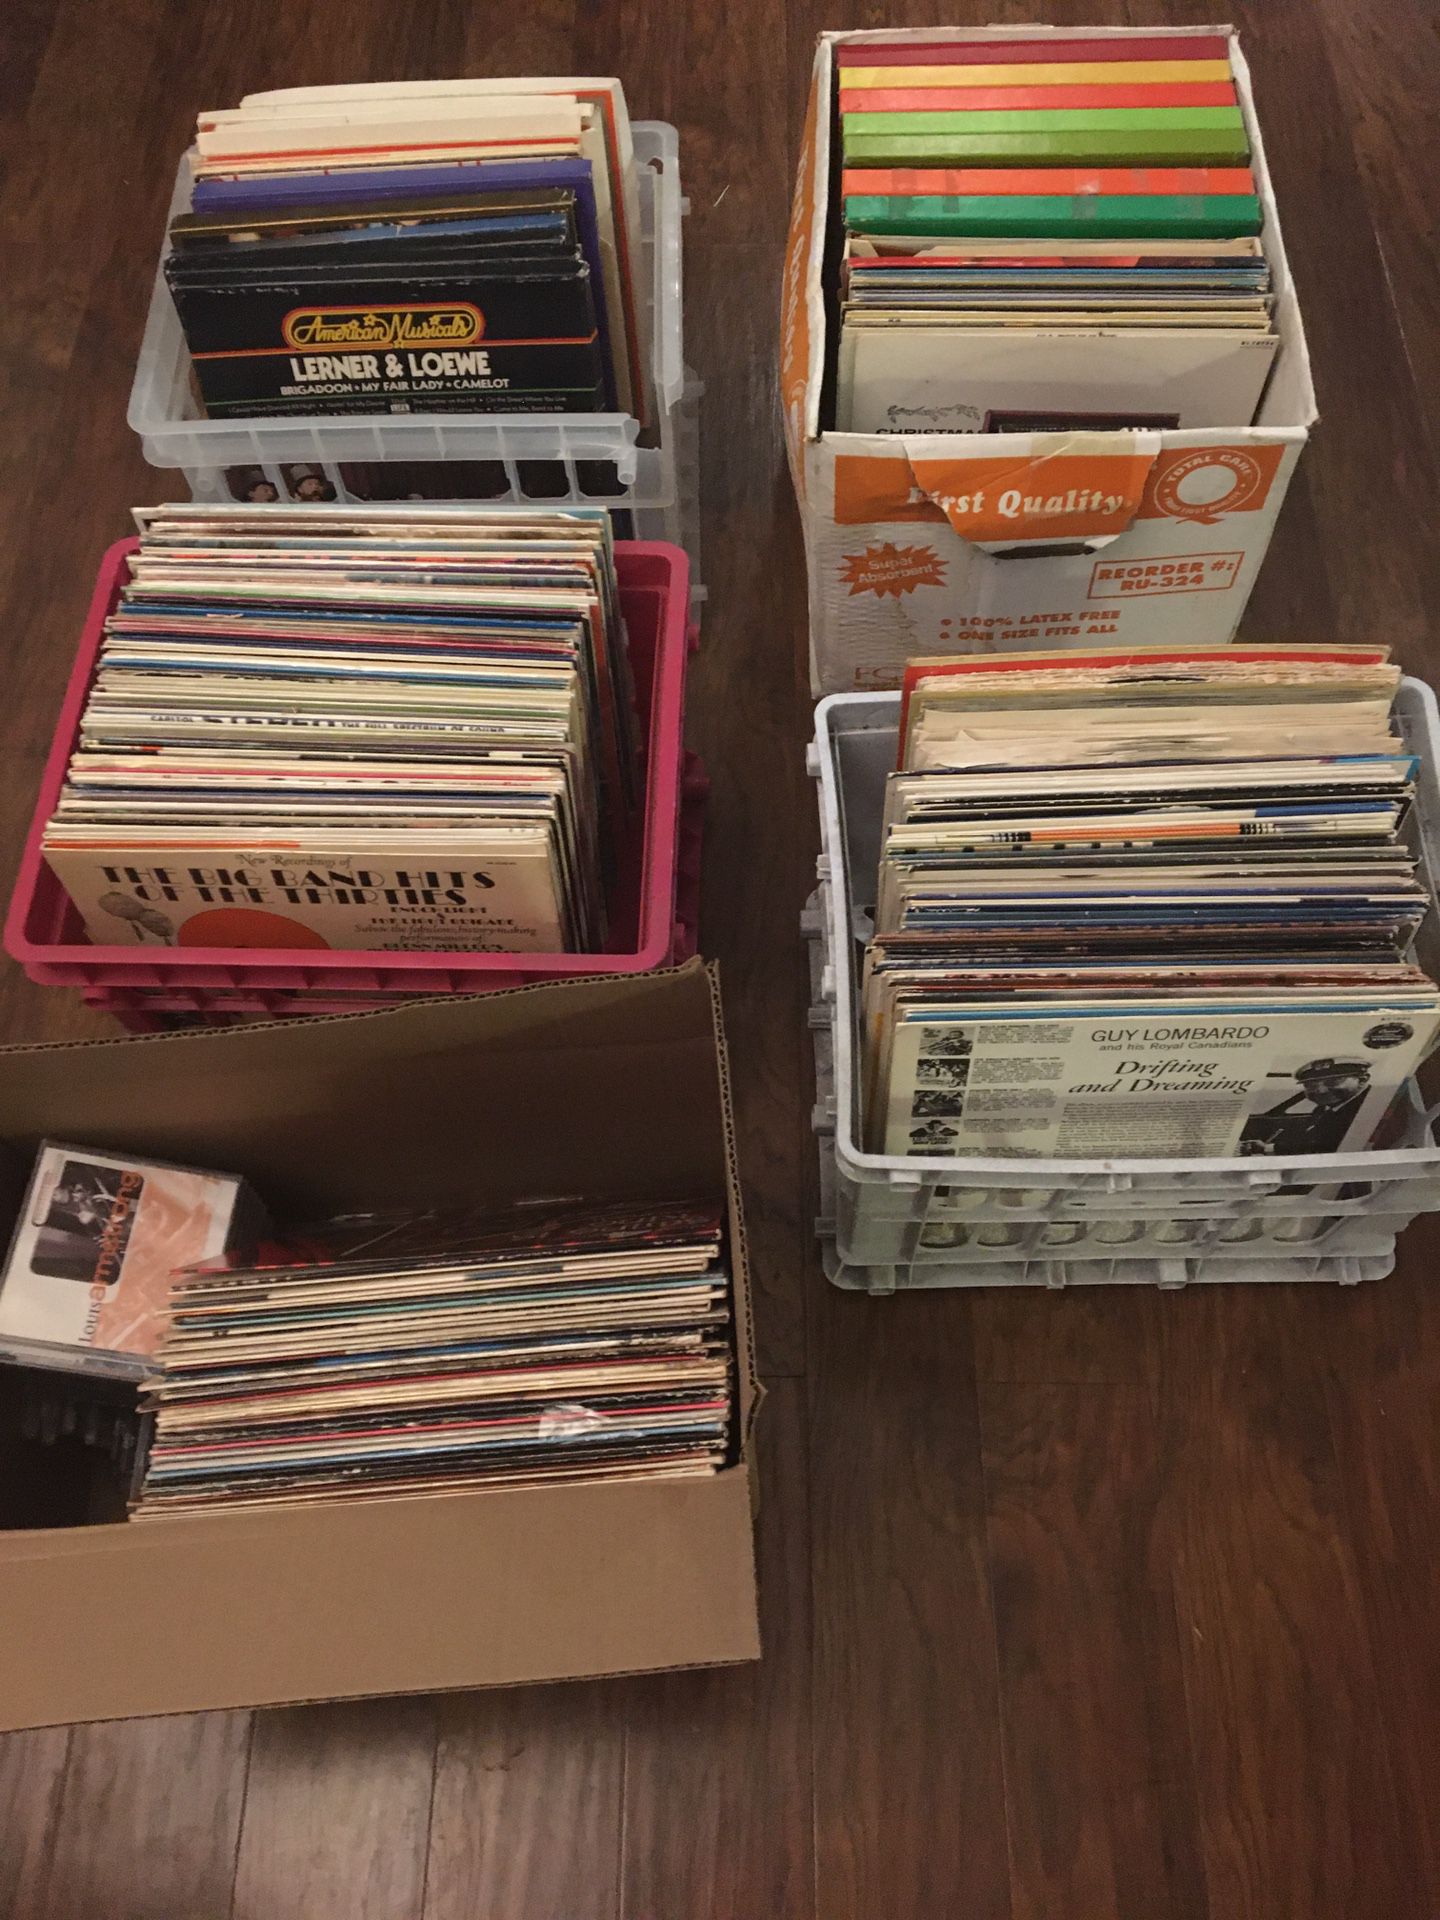 Used vinyl records - various artists